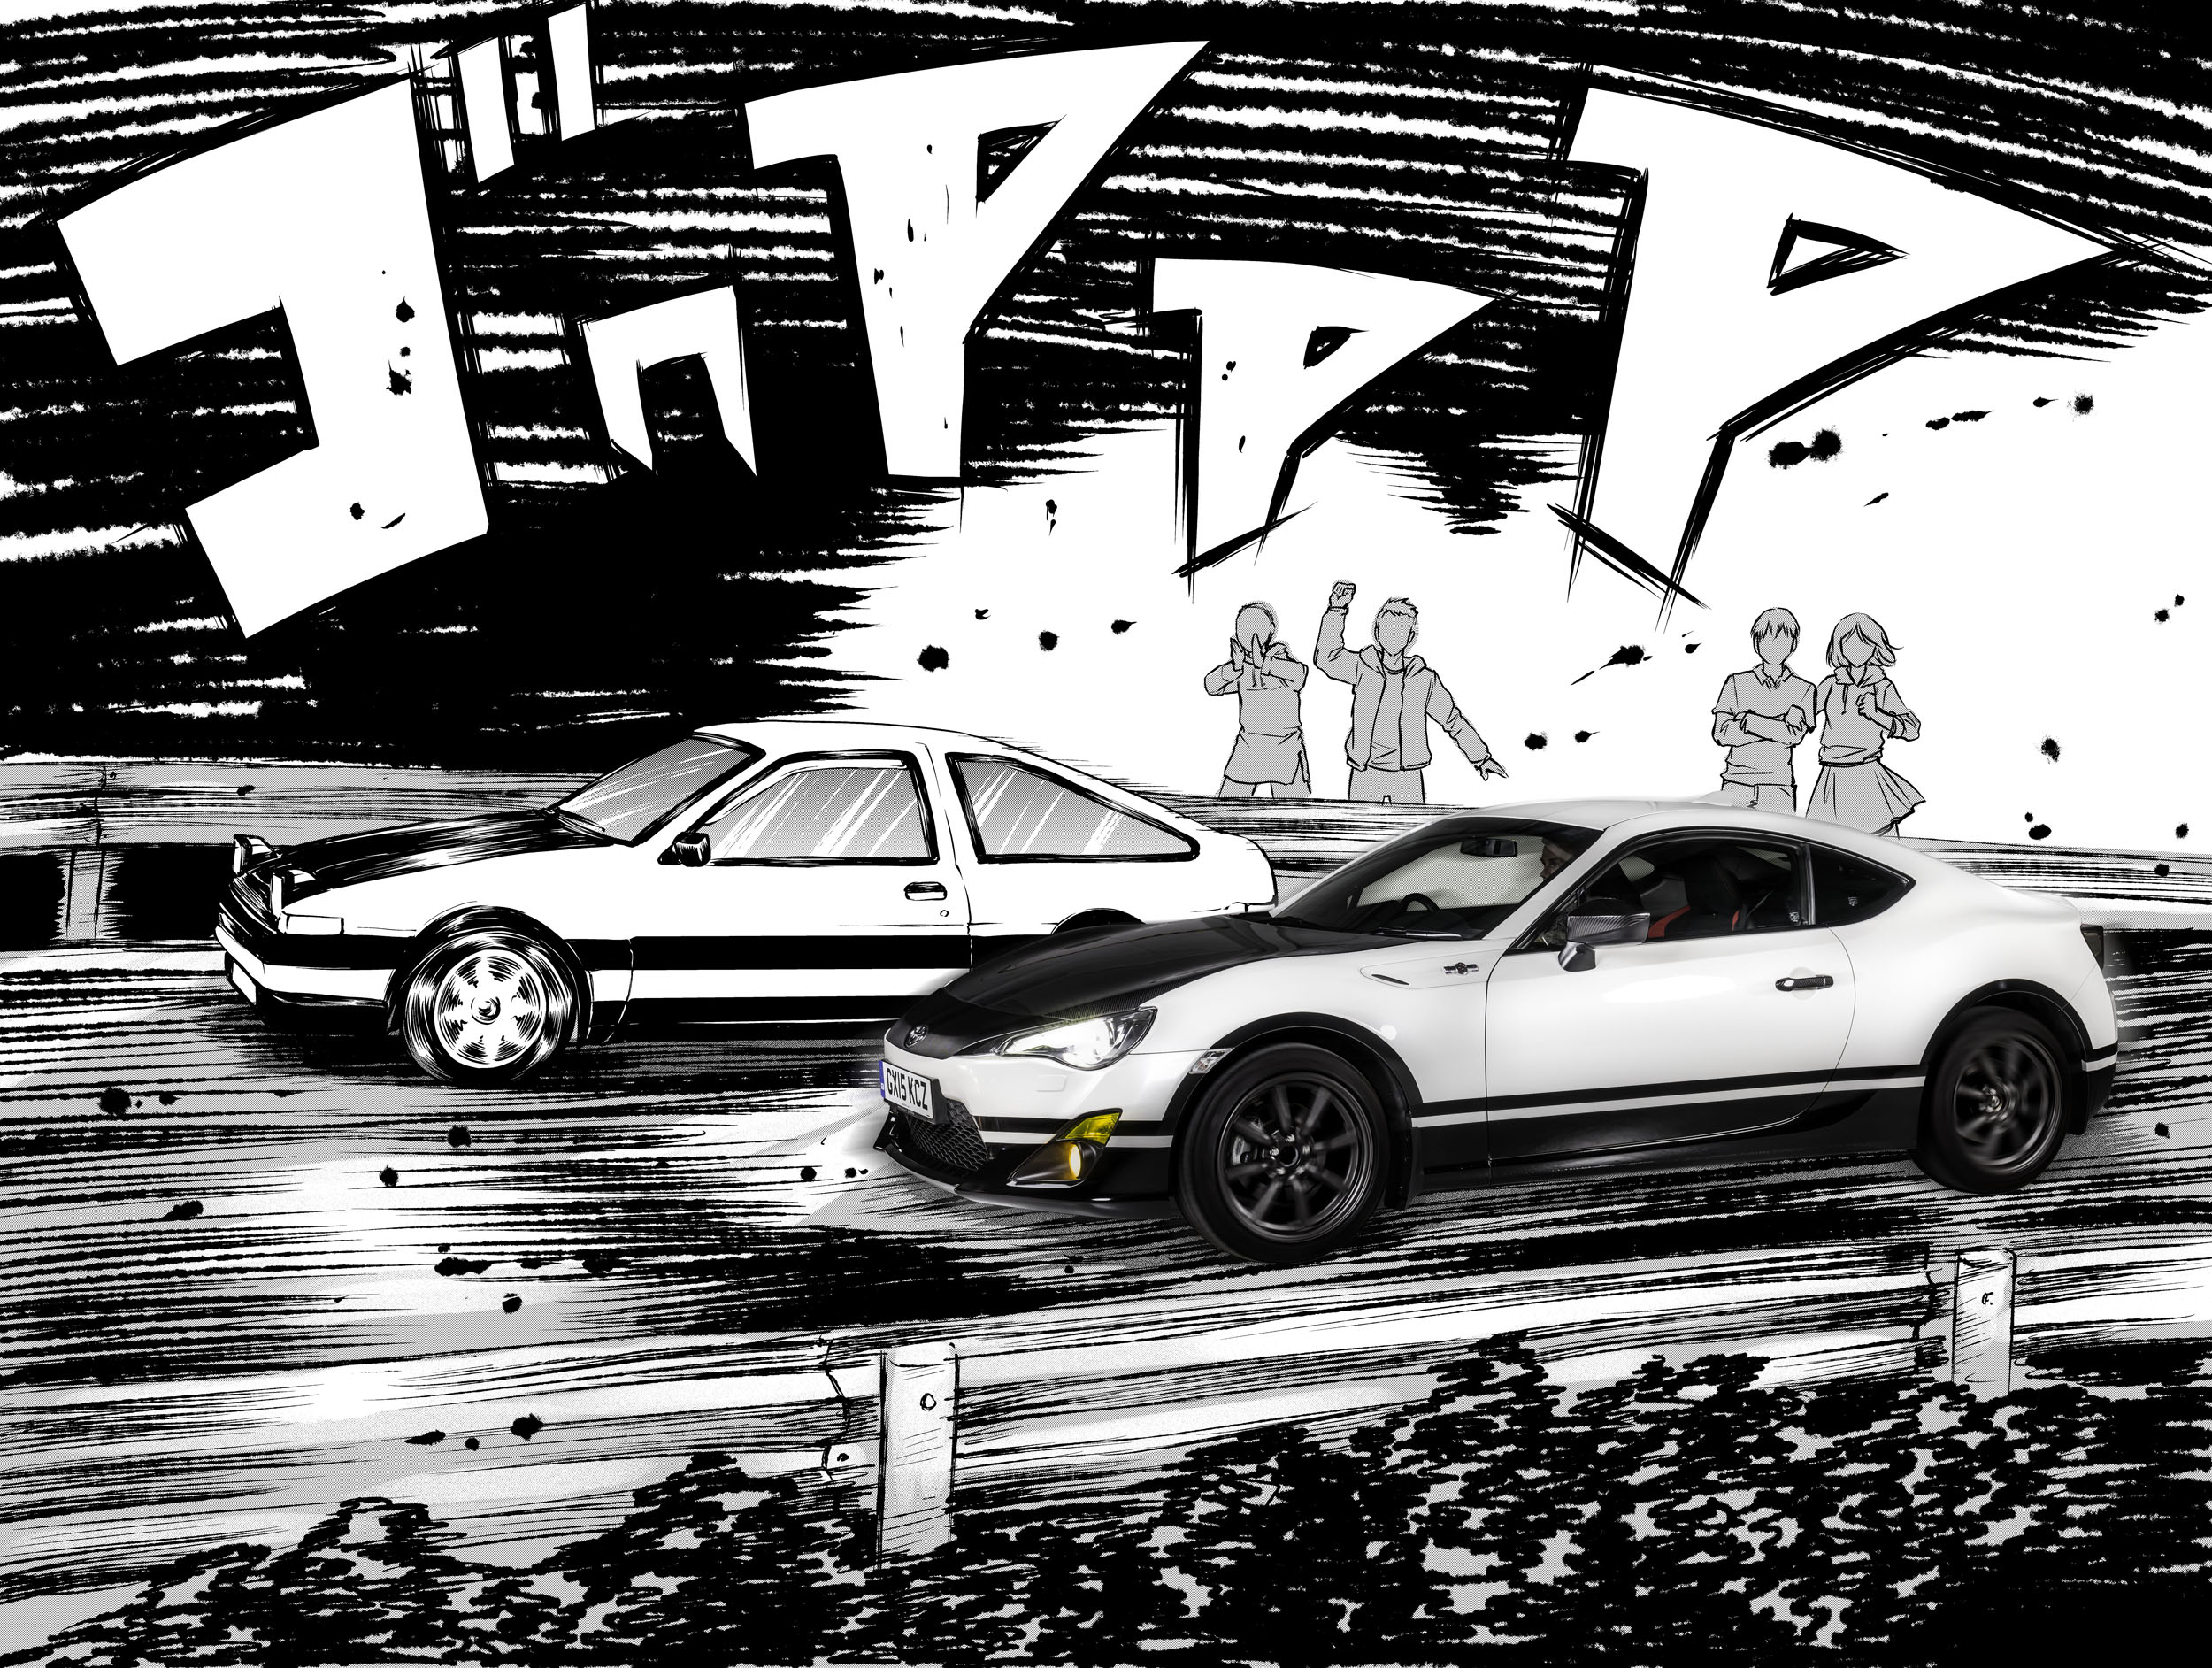 Toyota adopts manga style with Initial D-inspired GT86